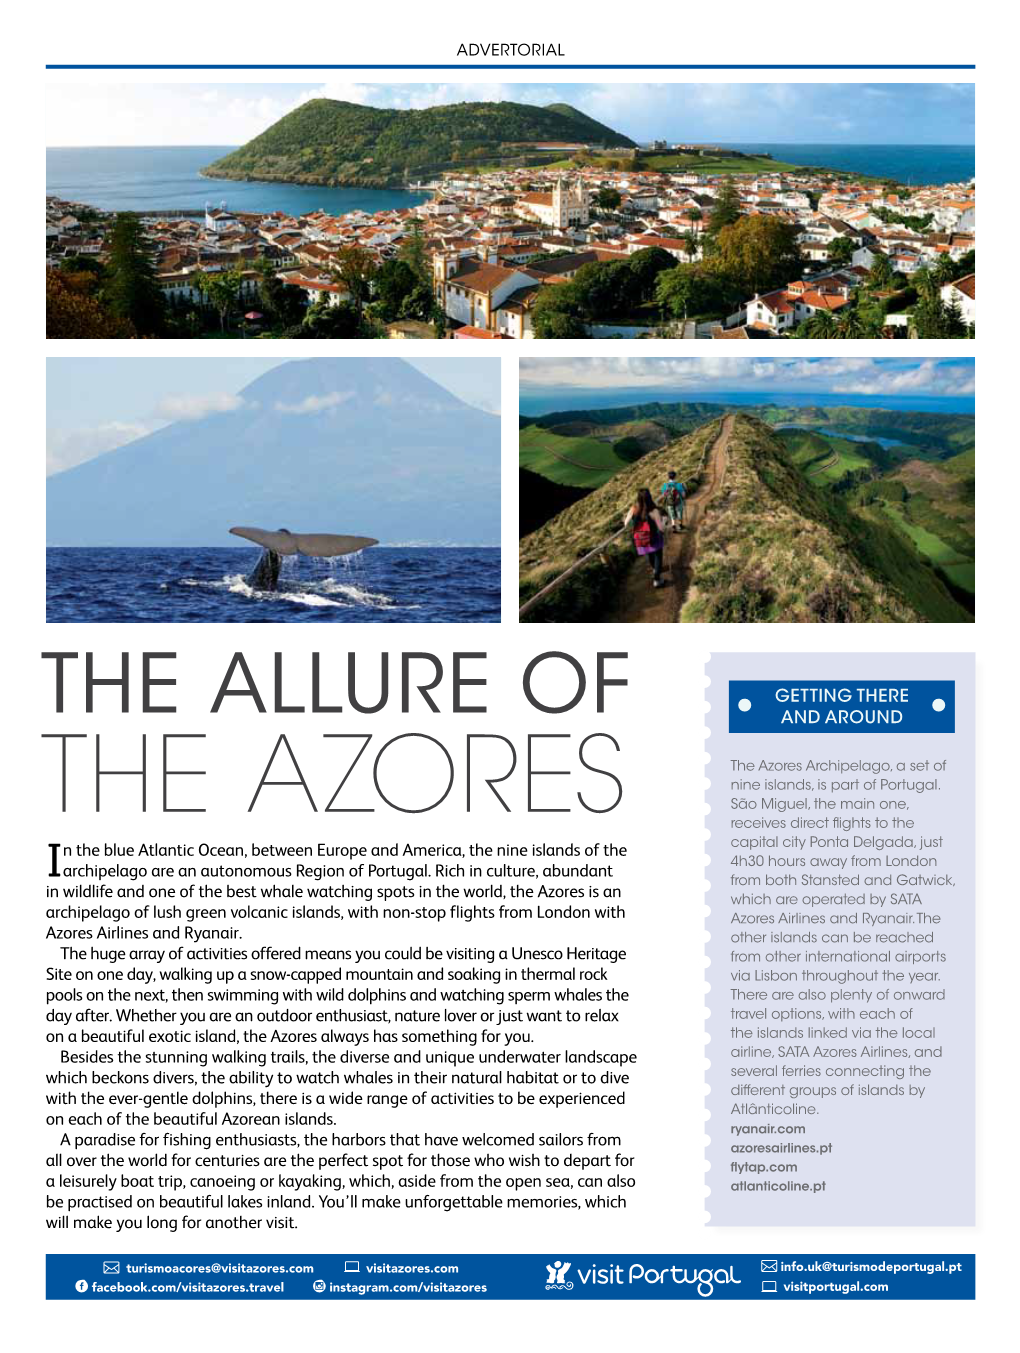 The Azores Archipelago, a Set of Nine Islands, Is Part of Portugal